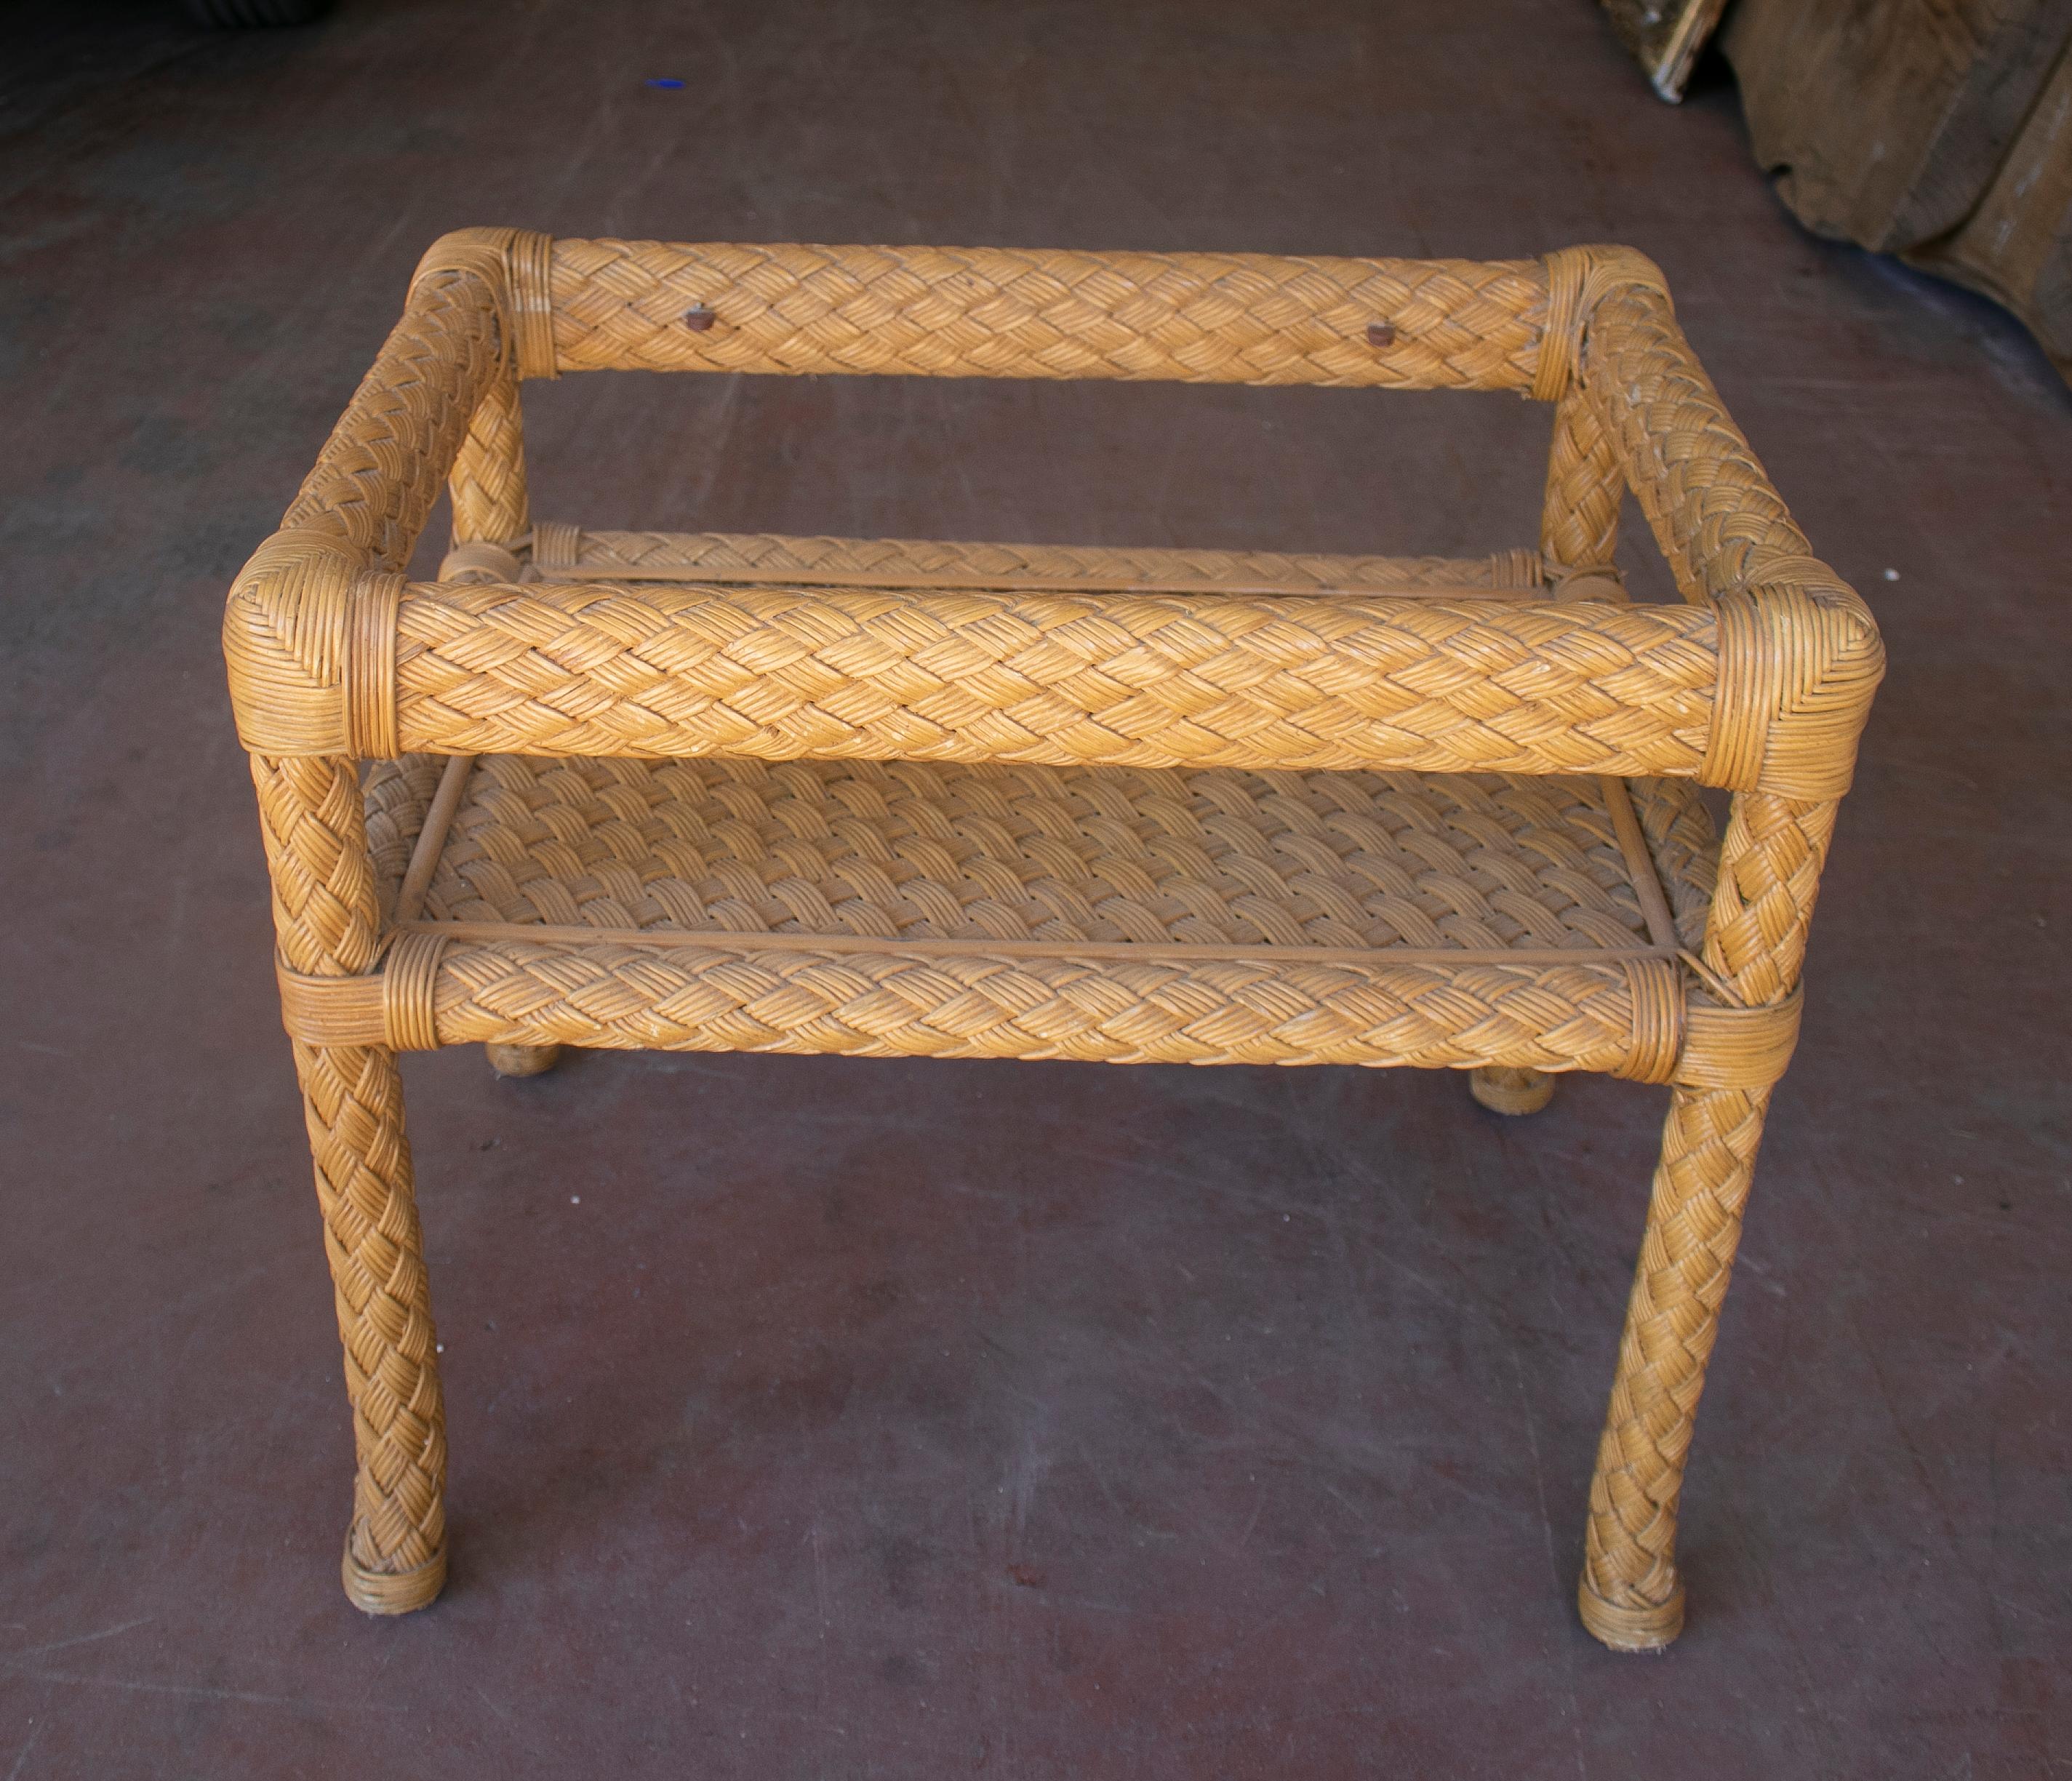 1970s Spanish Rectangular Side Table Base Imitating Woven Wicker In Excellent Condition For Sale In Marbella, ES